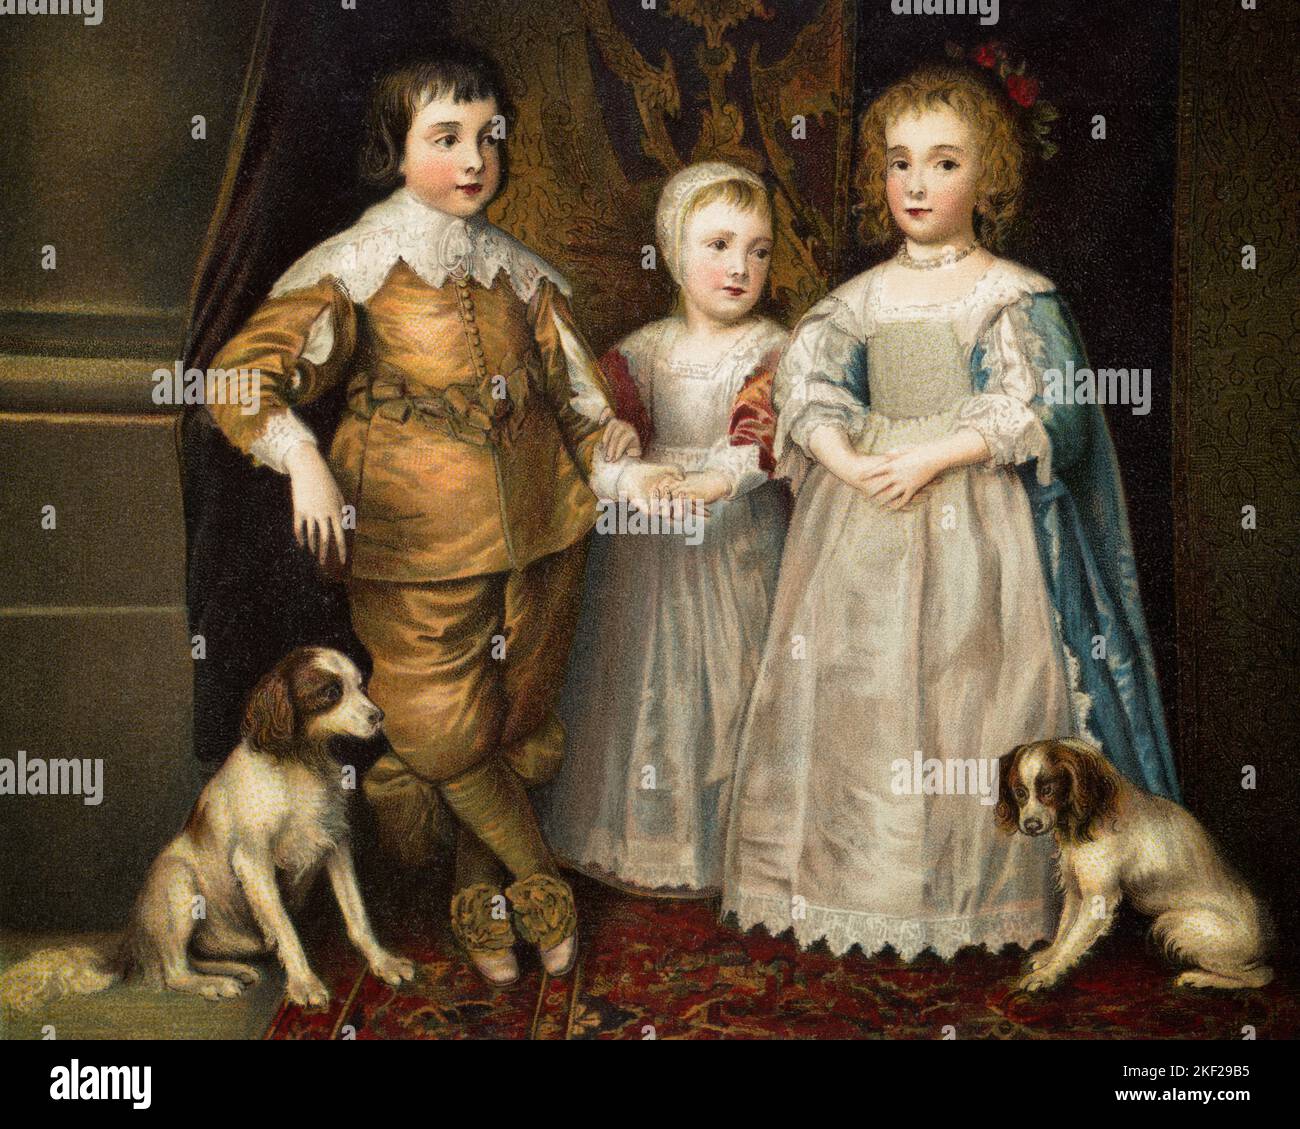 1630s 3 OLDEST CHILDREN OF CHARLES I OF GREAT BRITAIN BY FLEMISH ARTIST ANTHONY VAN DYCK PRINCE CHARLES THEN JAMES AND MARY - ka9444 HAR001 HARS LIFESTYLE FEMALES BROTHERS HOME LIFE LUXURY COPY SPACE FRIENDSHIP FULL-LENGTH DAUGHTERS PERSONS MALES ARTIST SIBLINGS SISTERS MARY BRITAIN MAMMALS STYLES AND CANINES LEADERSHIP SIBLING POOCH ANTHONY DERIVATIVE POSTCARD STYLISH ROYALTY CANINE FASHIONS GROWTH JUVENILES MAMMAL PRINCE TOGETHERNESS 1630s FLEMISH HAR001 JAMES OLD FASHIONED OLDEST Stock Photo